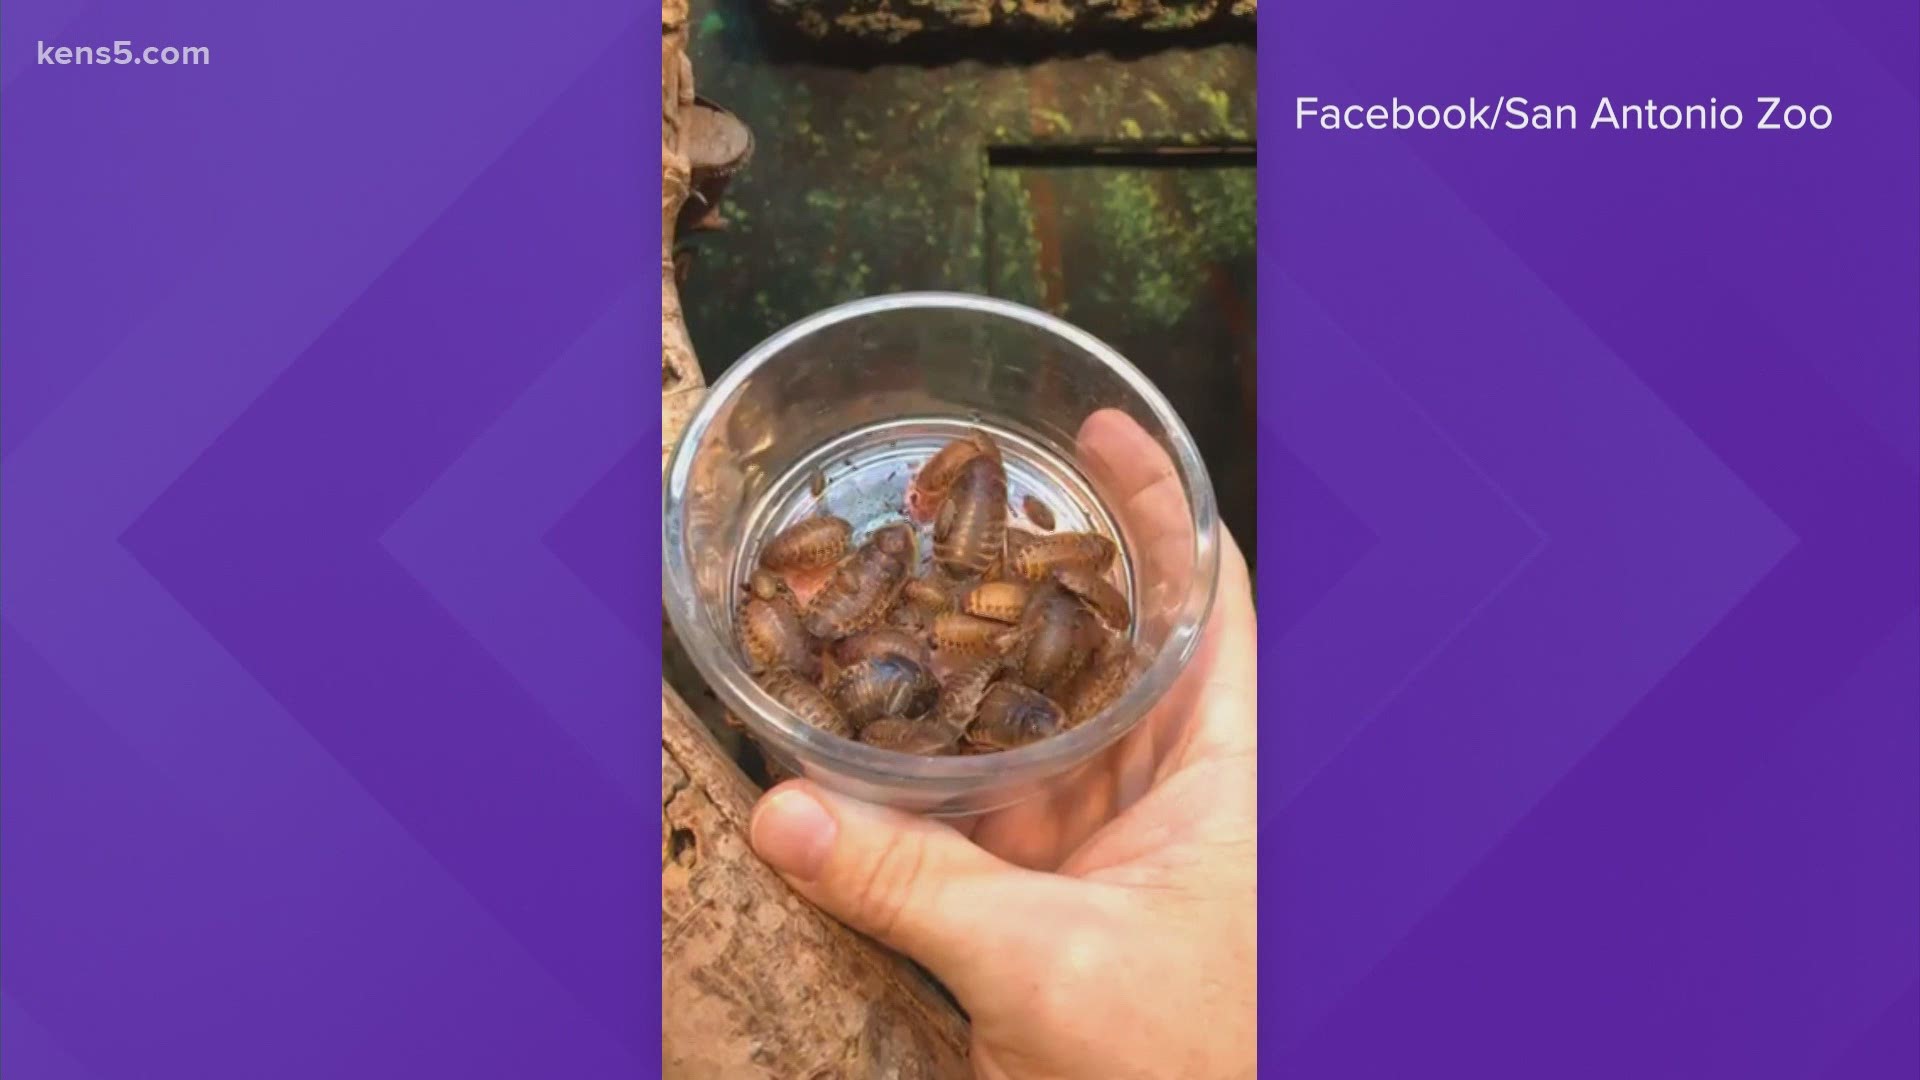 For just a few dollars, you can get over your ex by having a cockroach named and fed to an animal - which will be livestreamed on Valentine's Day.